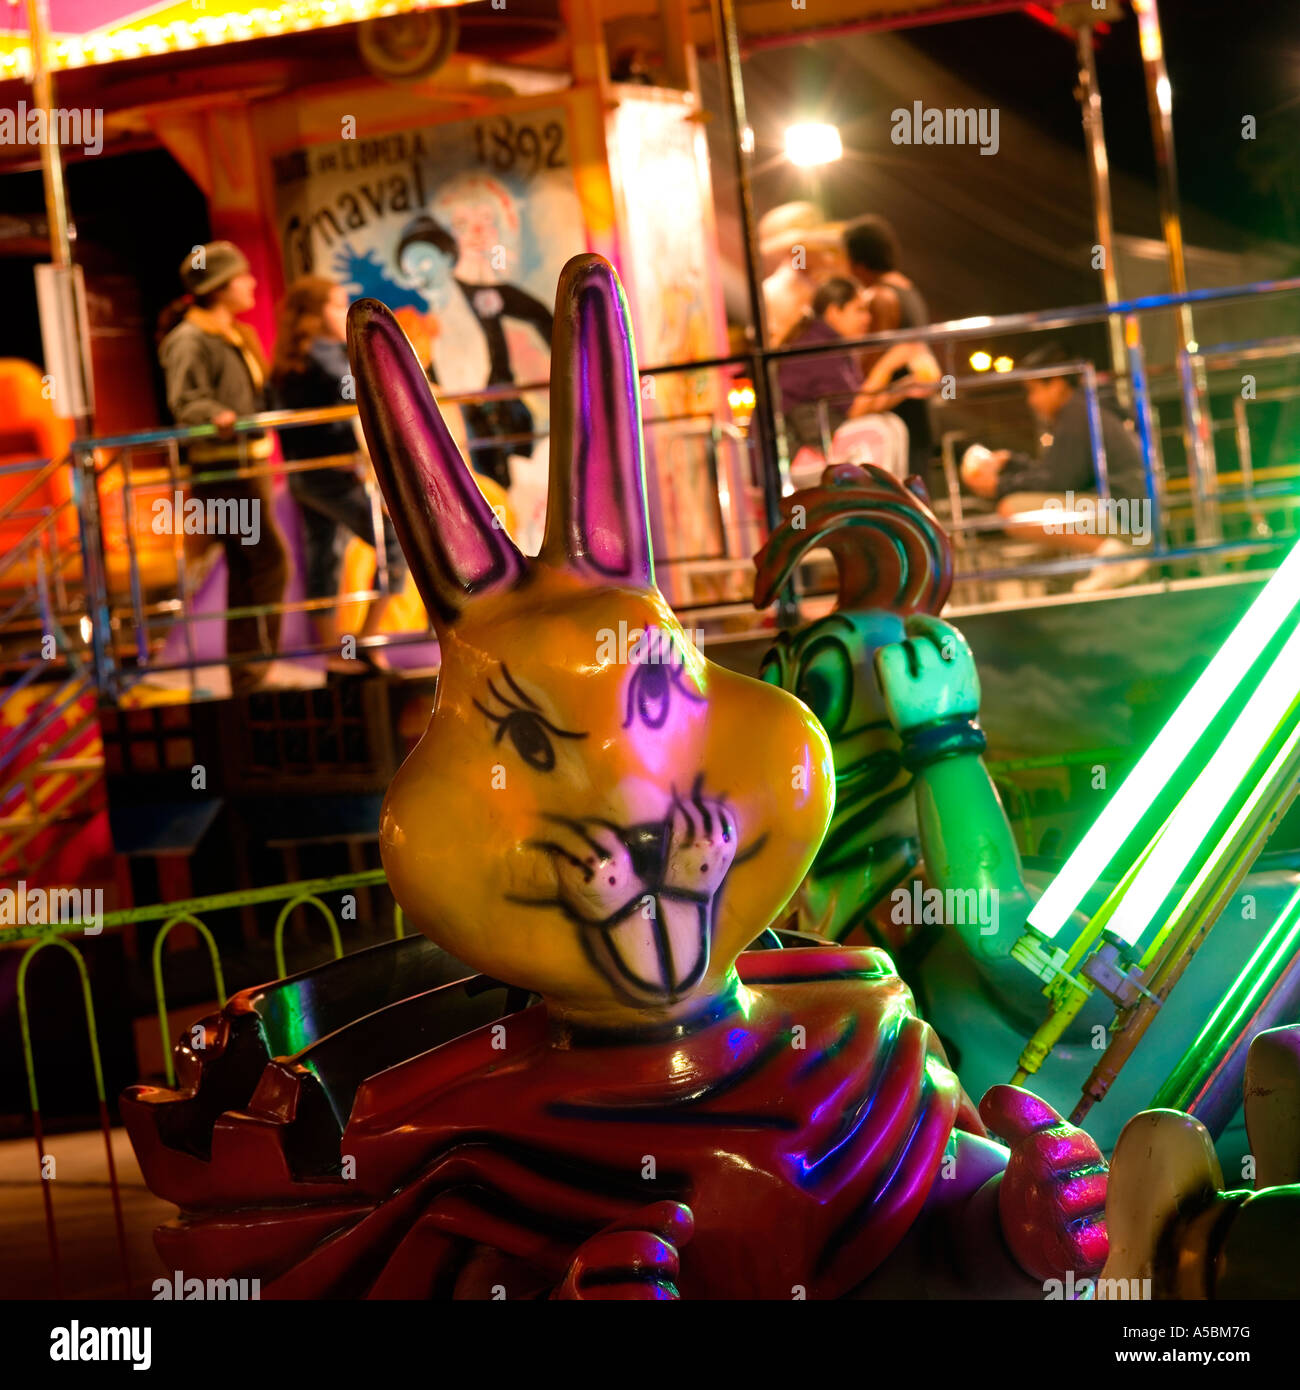 Night time rabbit ride at fairground surreal weird unusual image concept greeting card idea Stock Photo